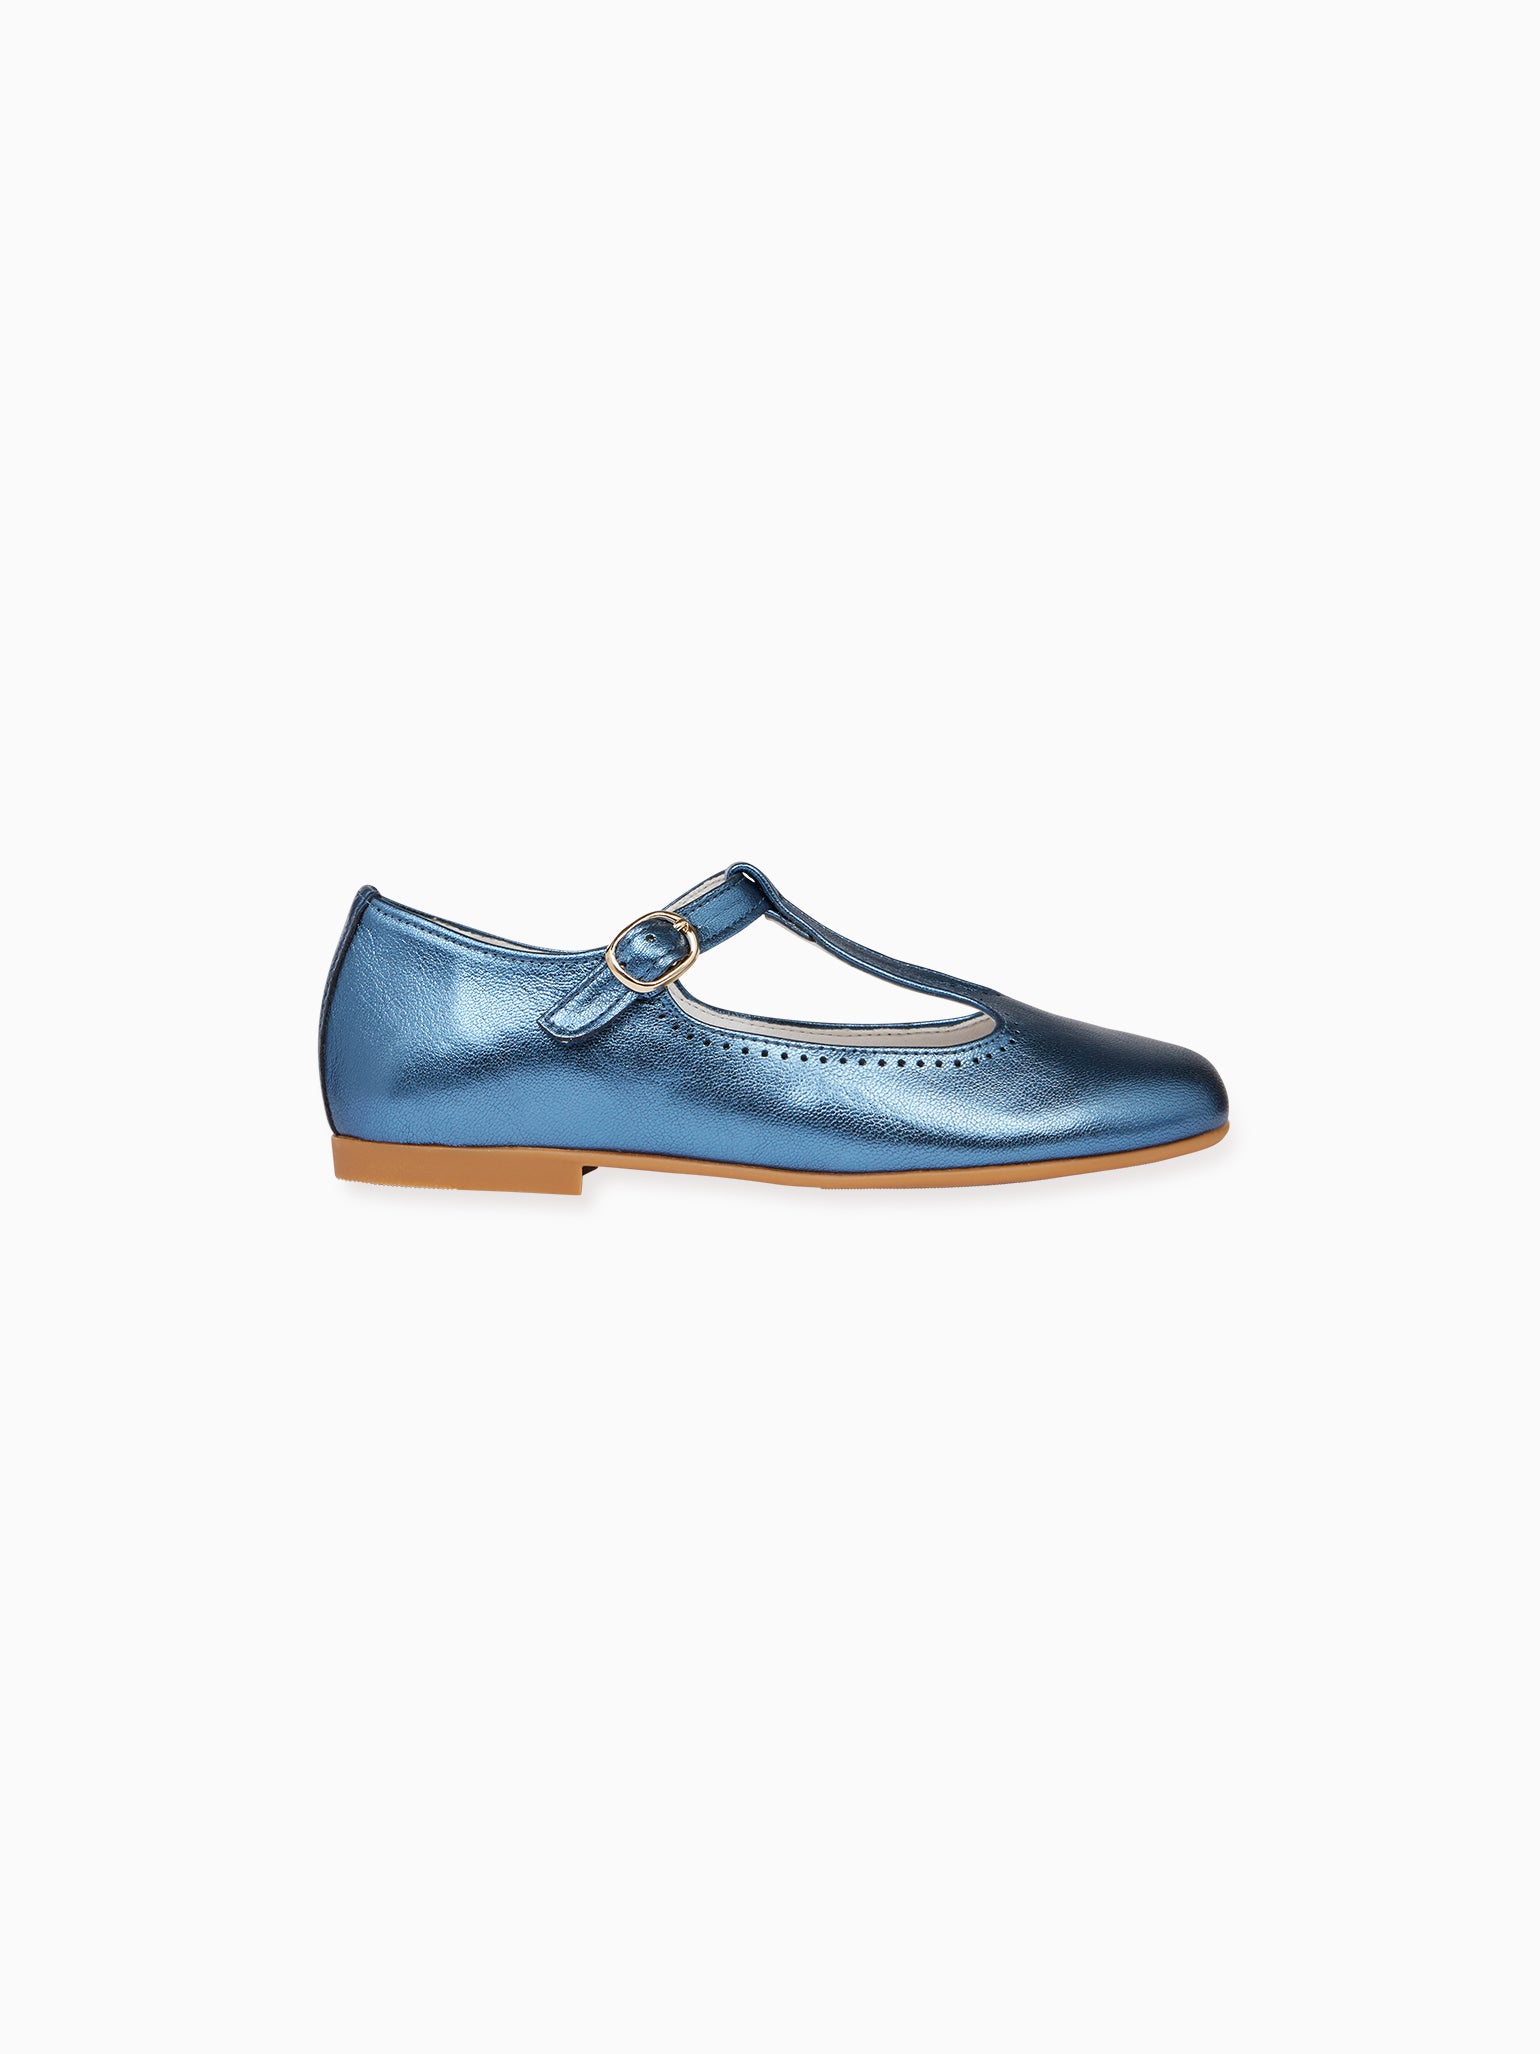 Blue Metallic Leather Girl T-Bar Shoes